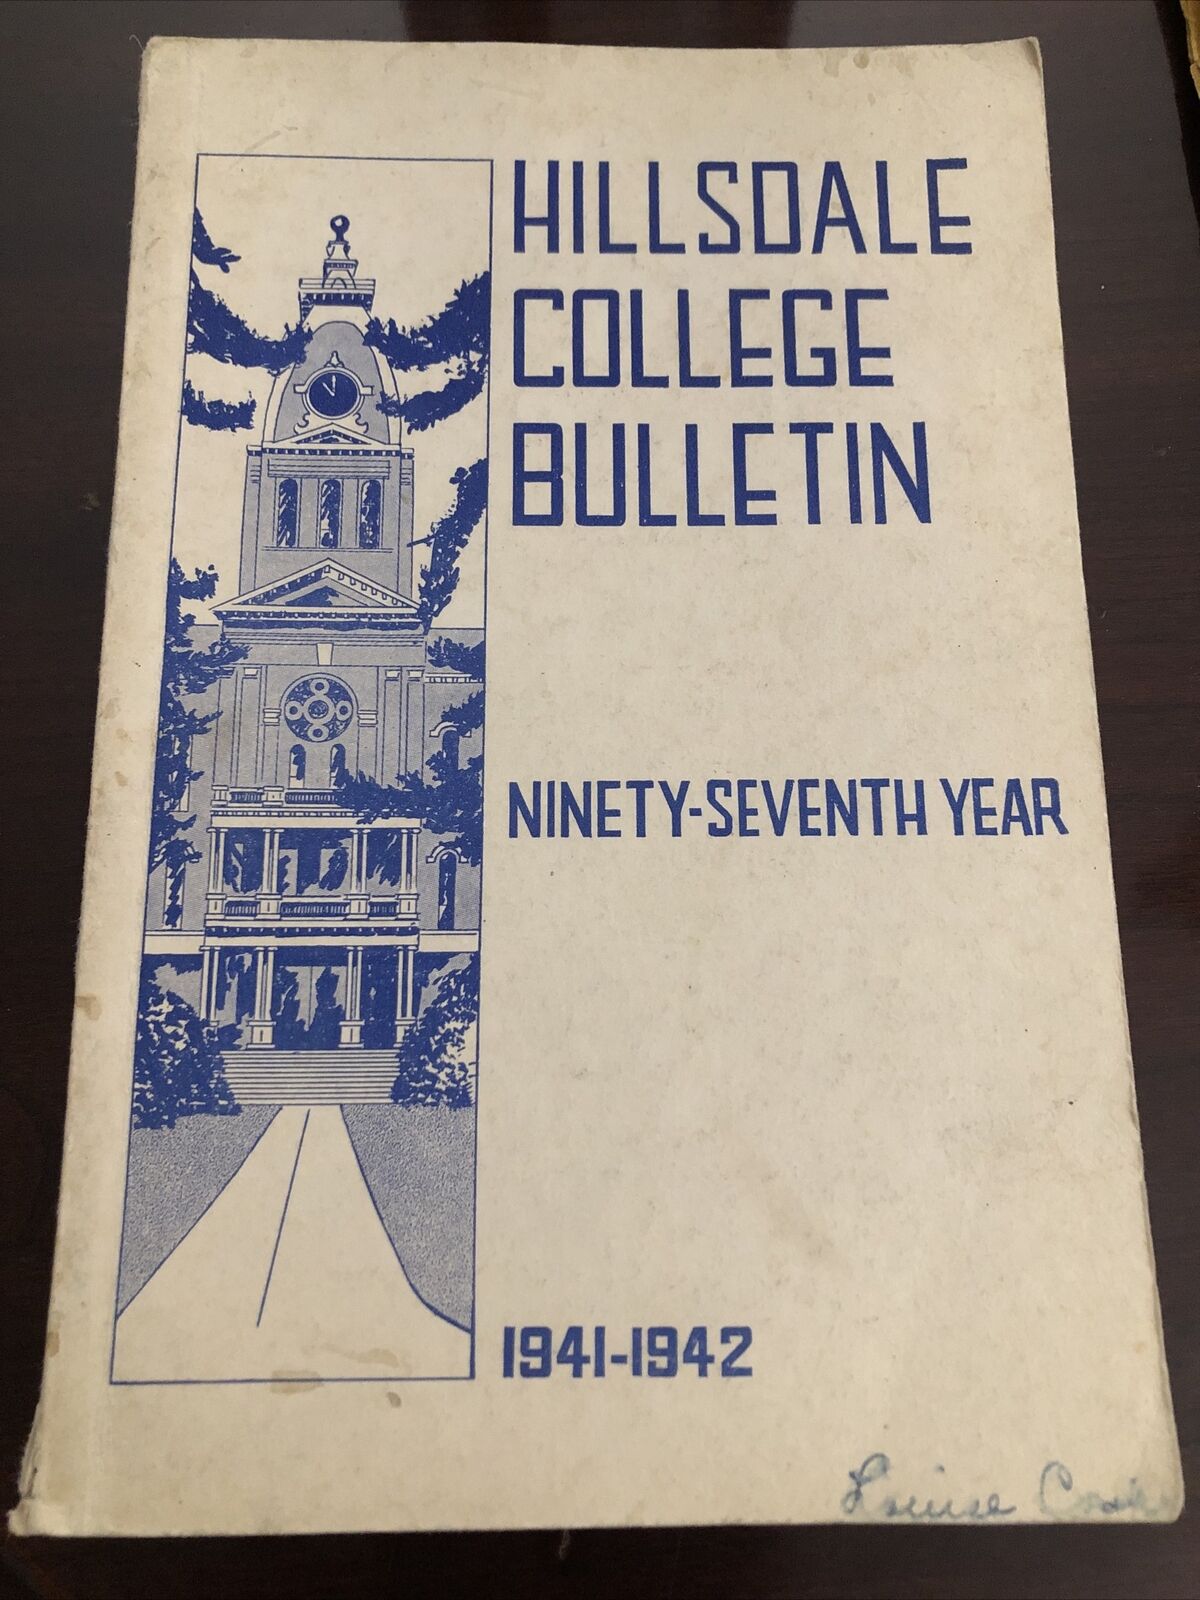 1941-1942 Hillsdale College Bulletin Book 97th Year.